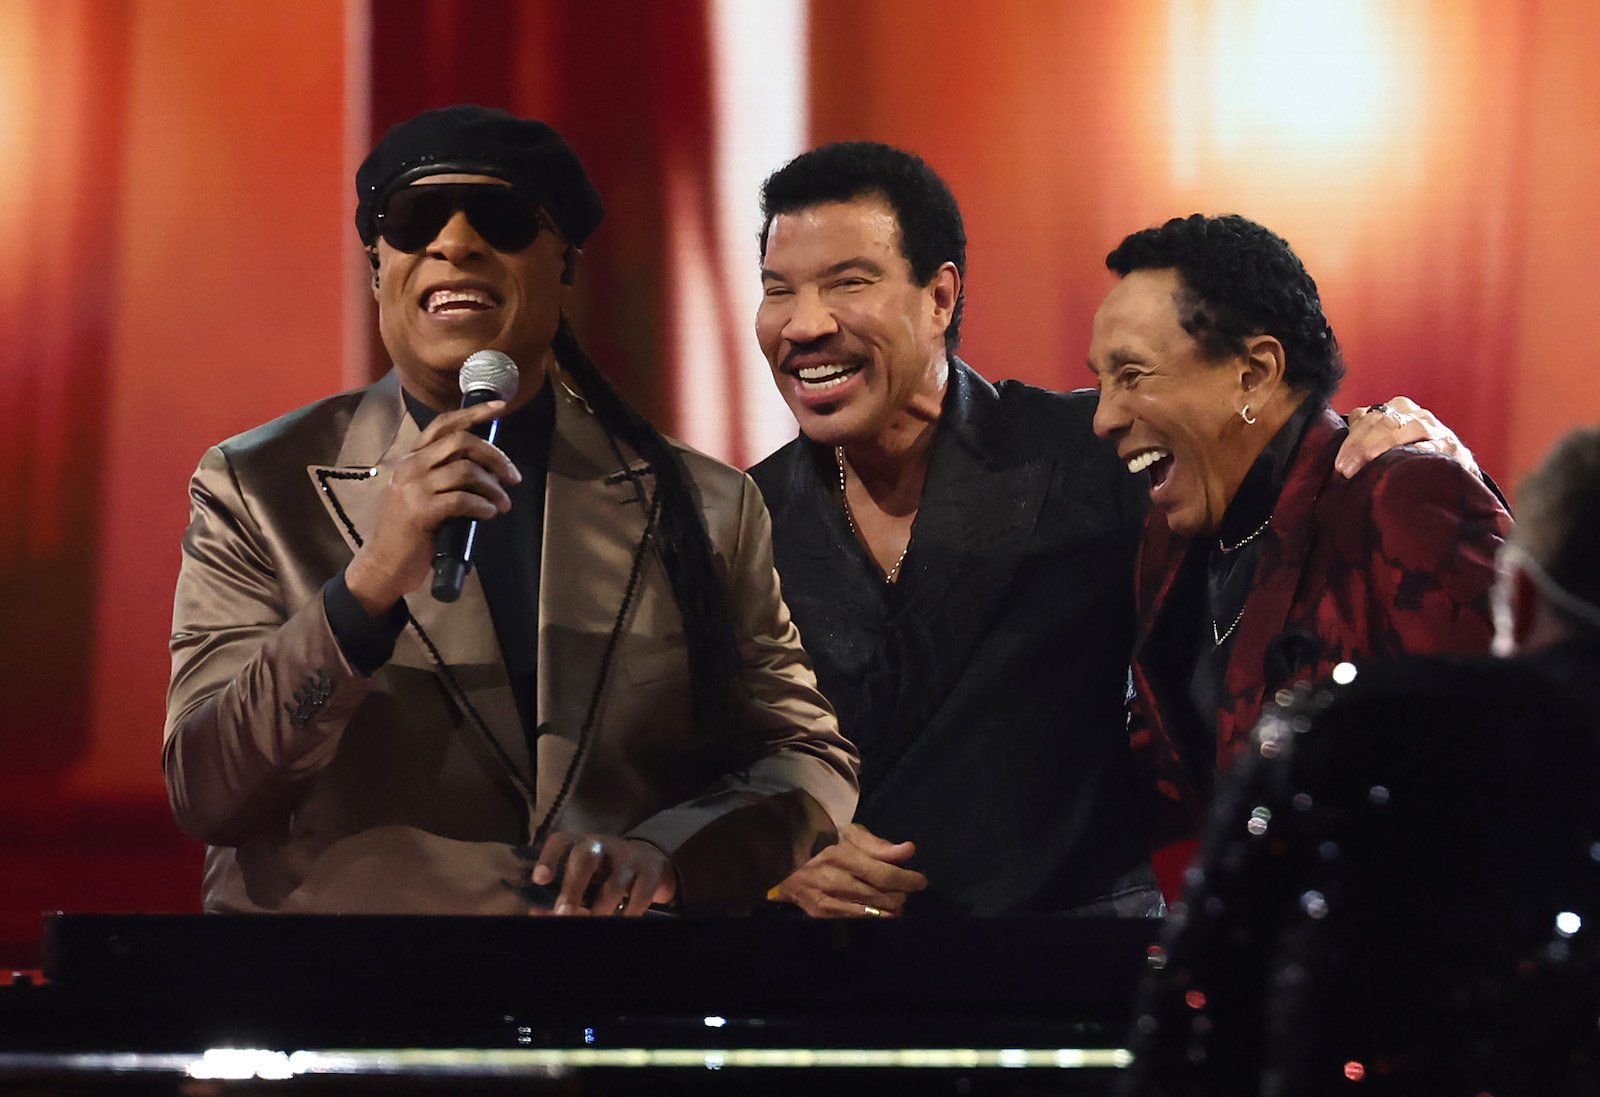 Stevie Wonder, Lionel Richie, and Smokey Robinson on stage together in one of the unforgettable moments from the 2022 AMAs